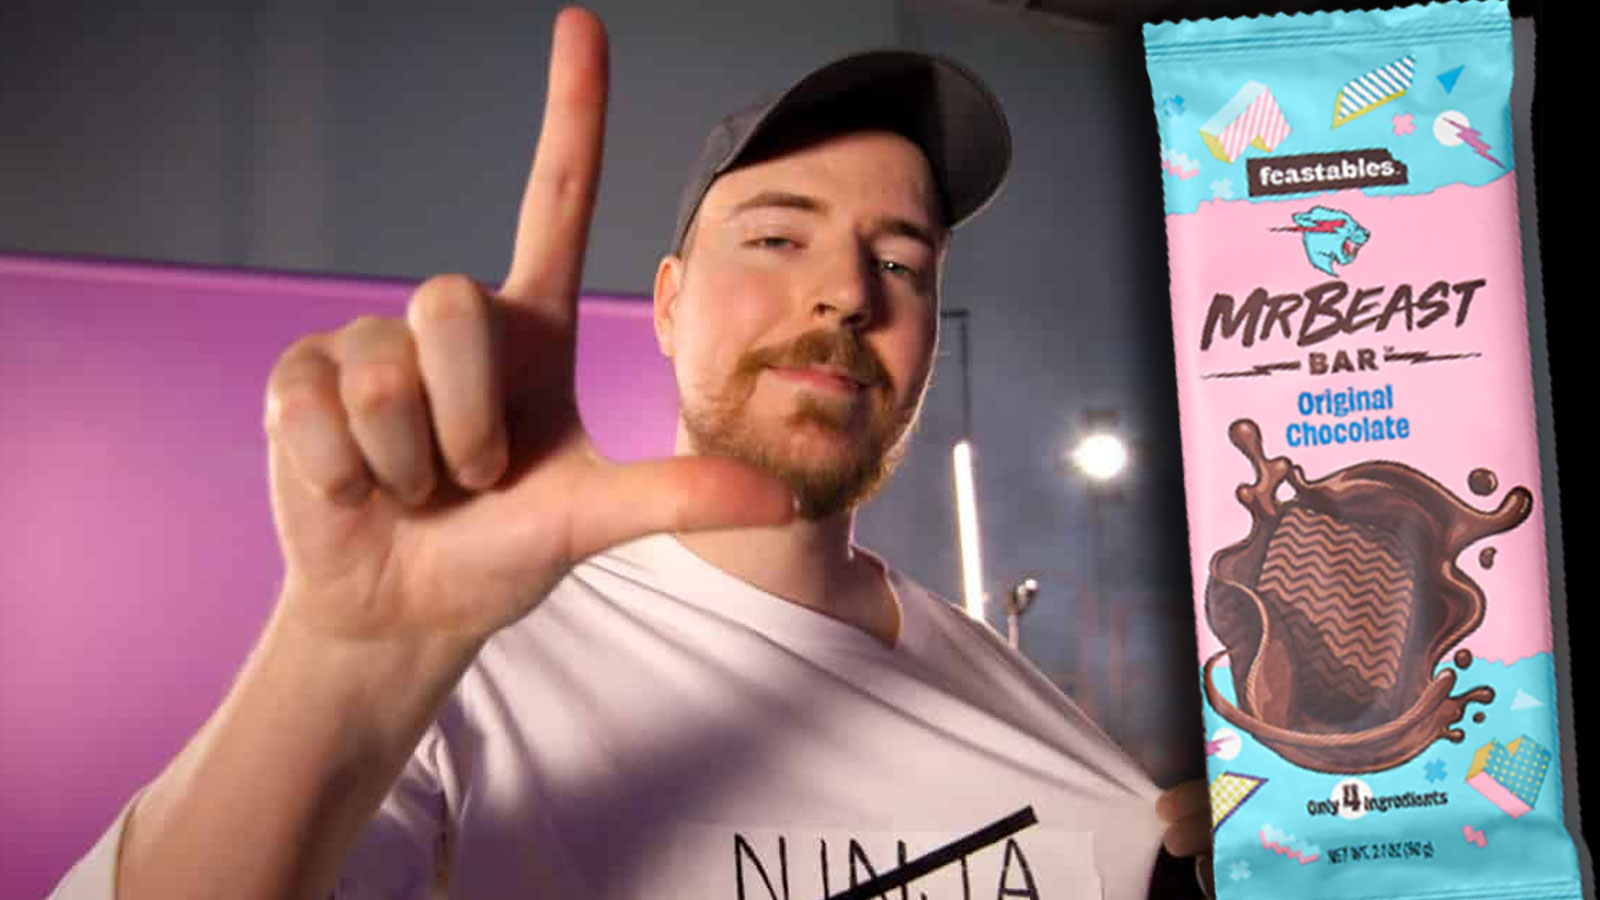 MrBeast asks fans to help 'sabotage' Feastables competitors in local stores  - Dexerto